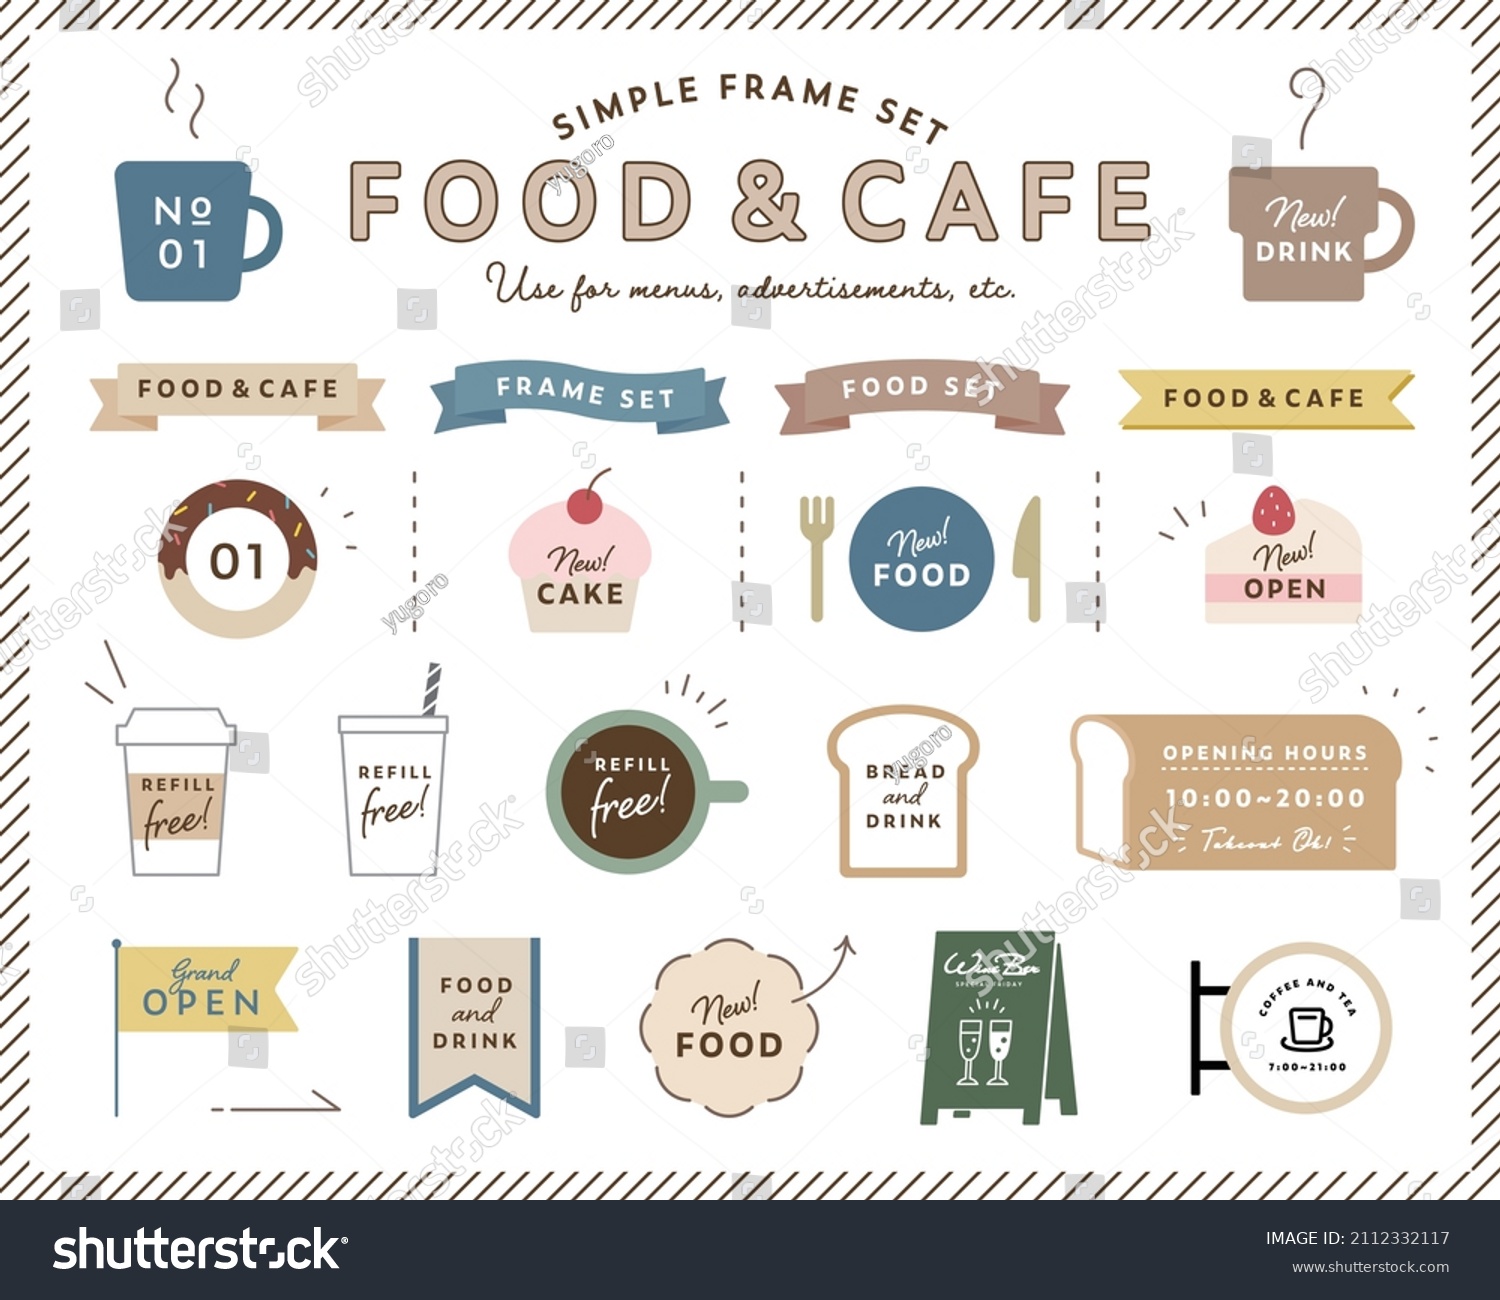 A set of simple, flat frame and decorative illustrations that can be used for advertising cafes and restaurants.
There are illustrations of coffee, cake, bread, signs, etc. #2112332117